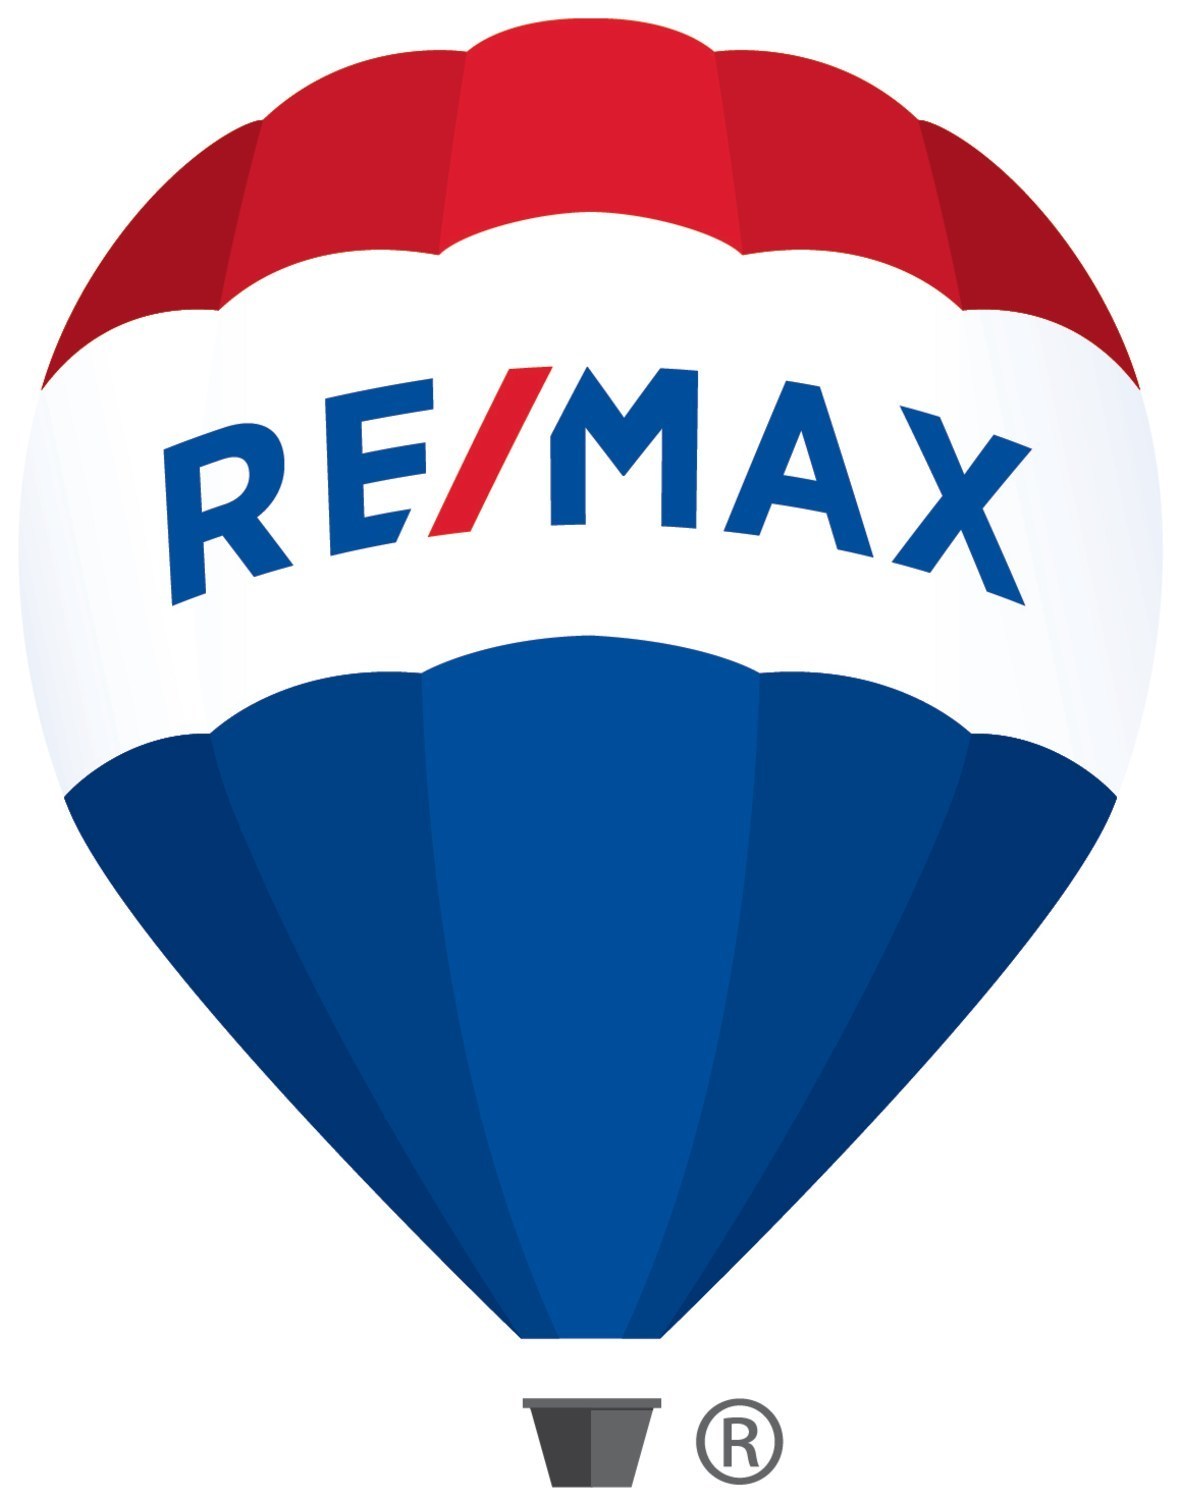 Remax® Unveils 2023 Ad Campaign Showcasing The Value Affiliated Real Estate Agents Provide